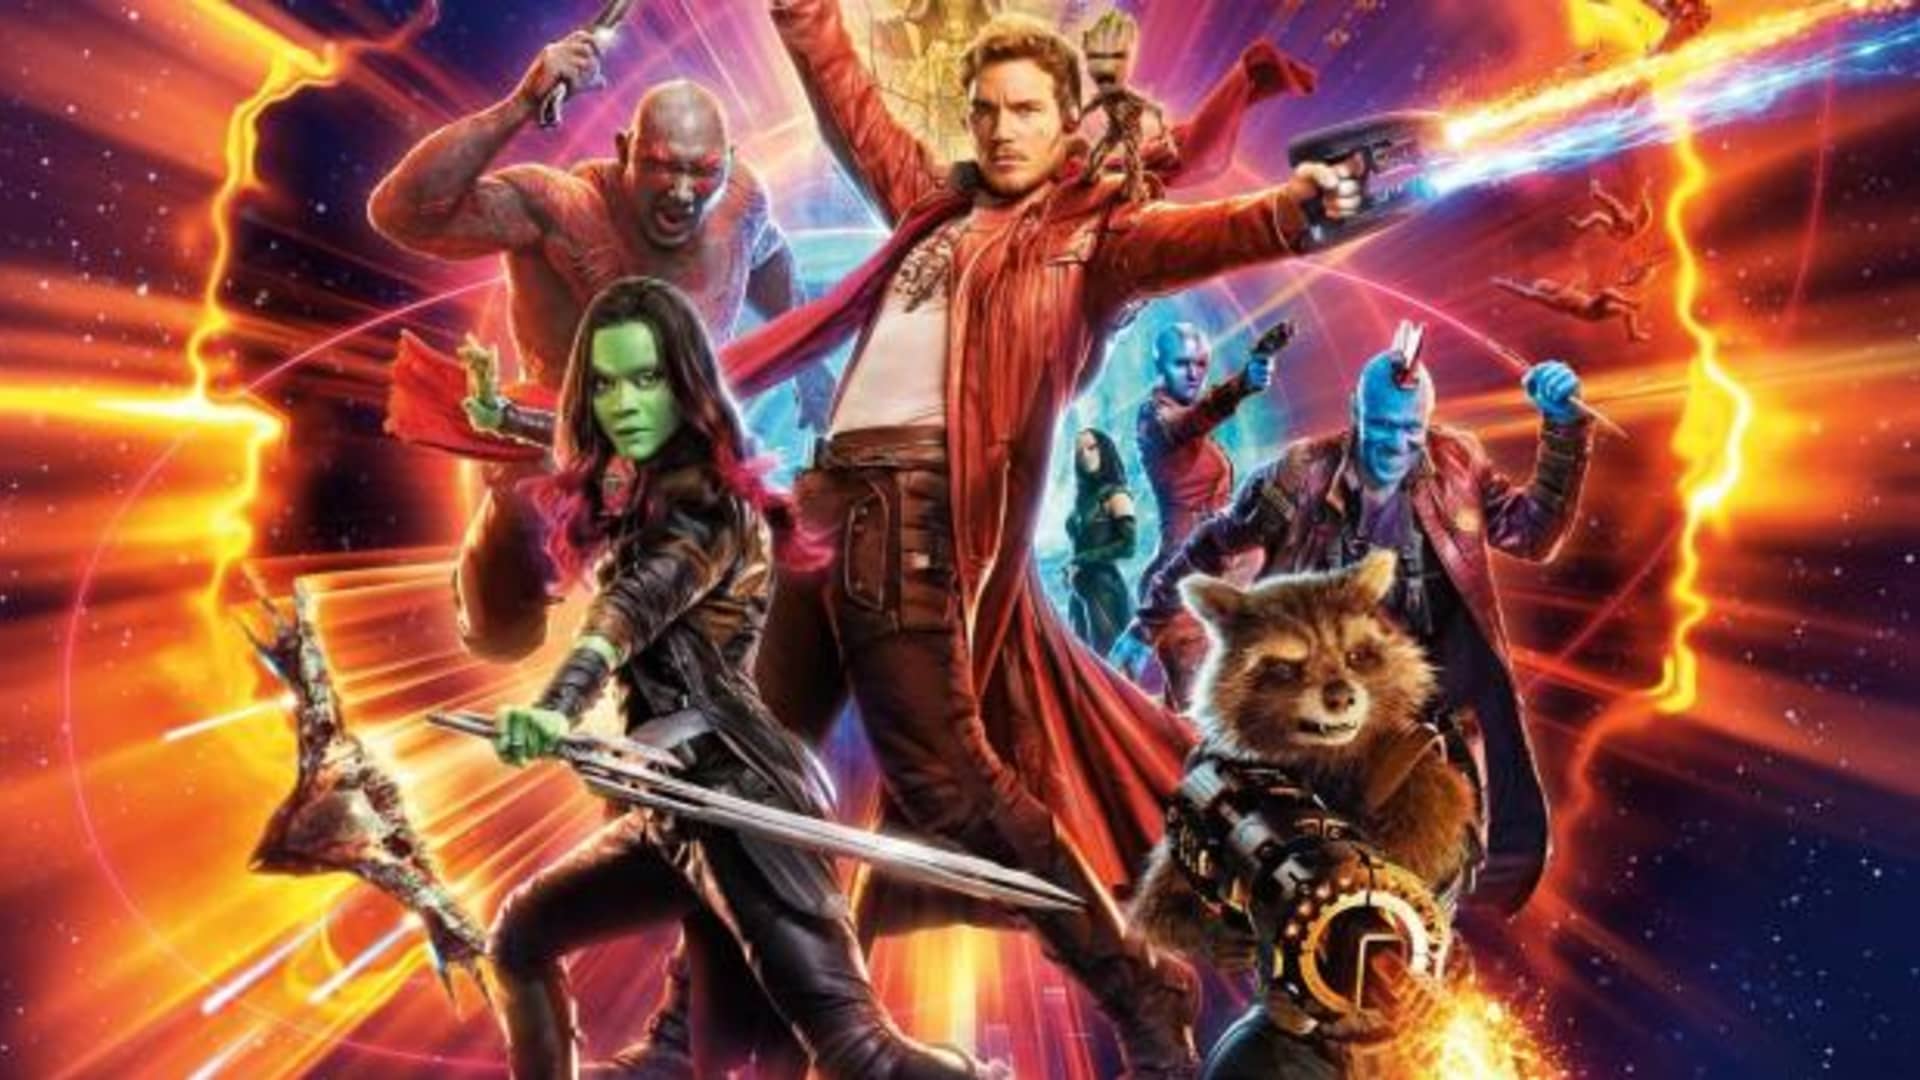 Guardians of the Galaxy': One-time underdog returns with $145M debut